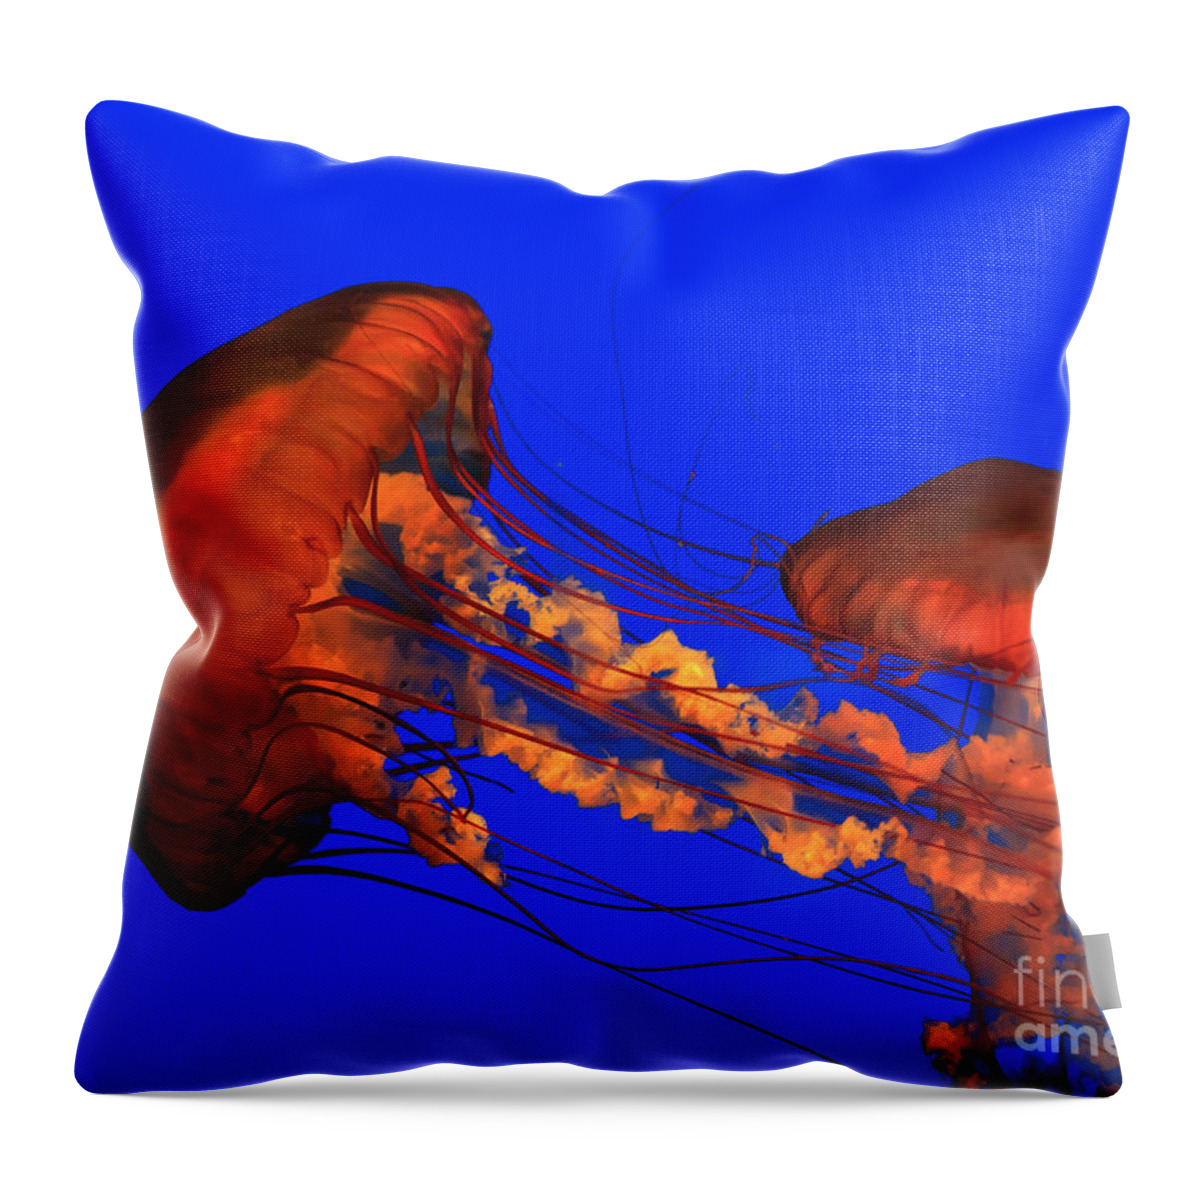 Ripley's Throw Pillow featuring the photograph Jellyfish by Jill Lang